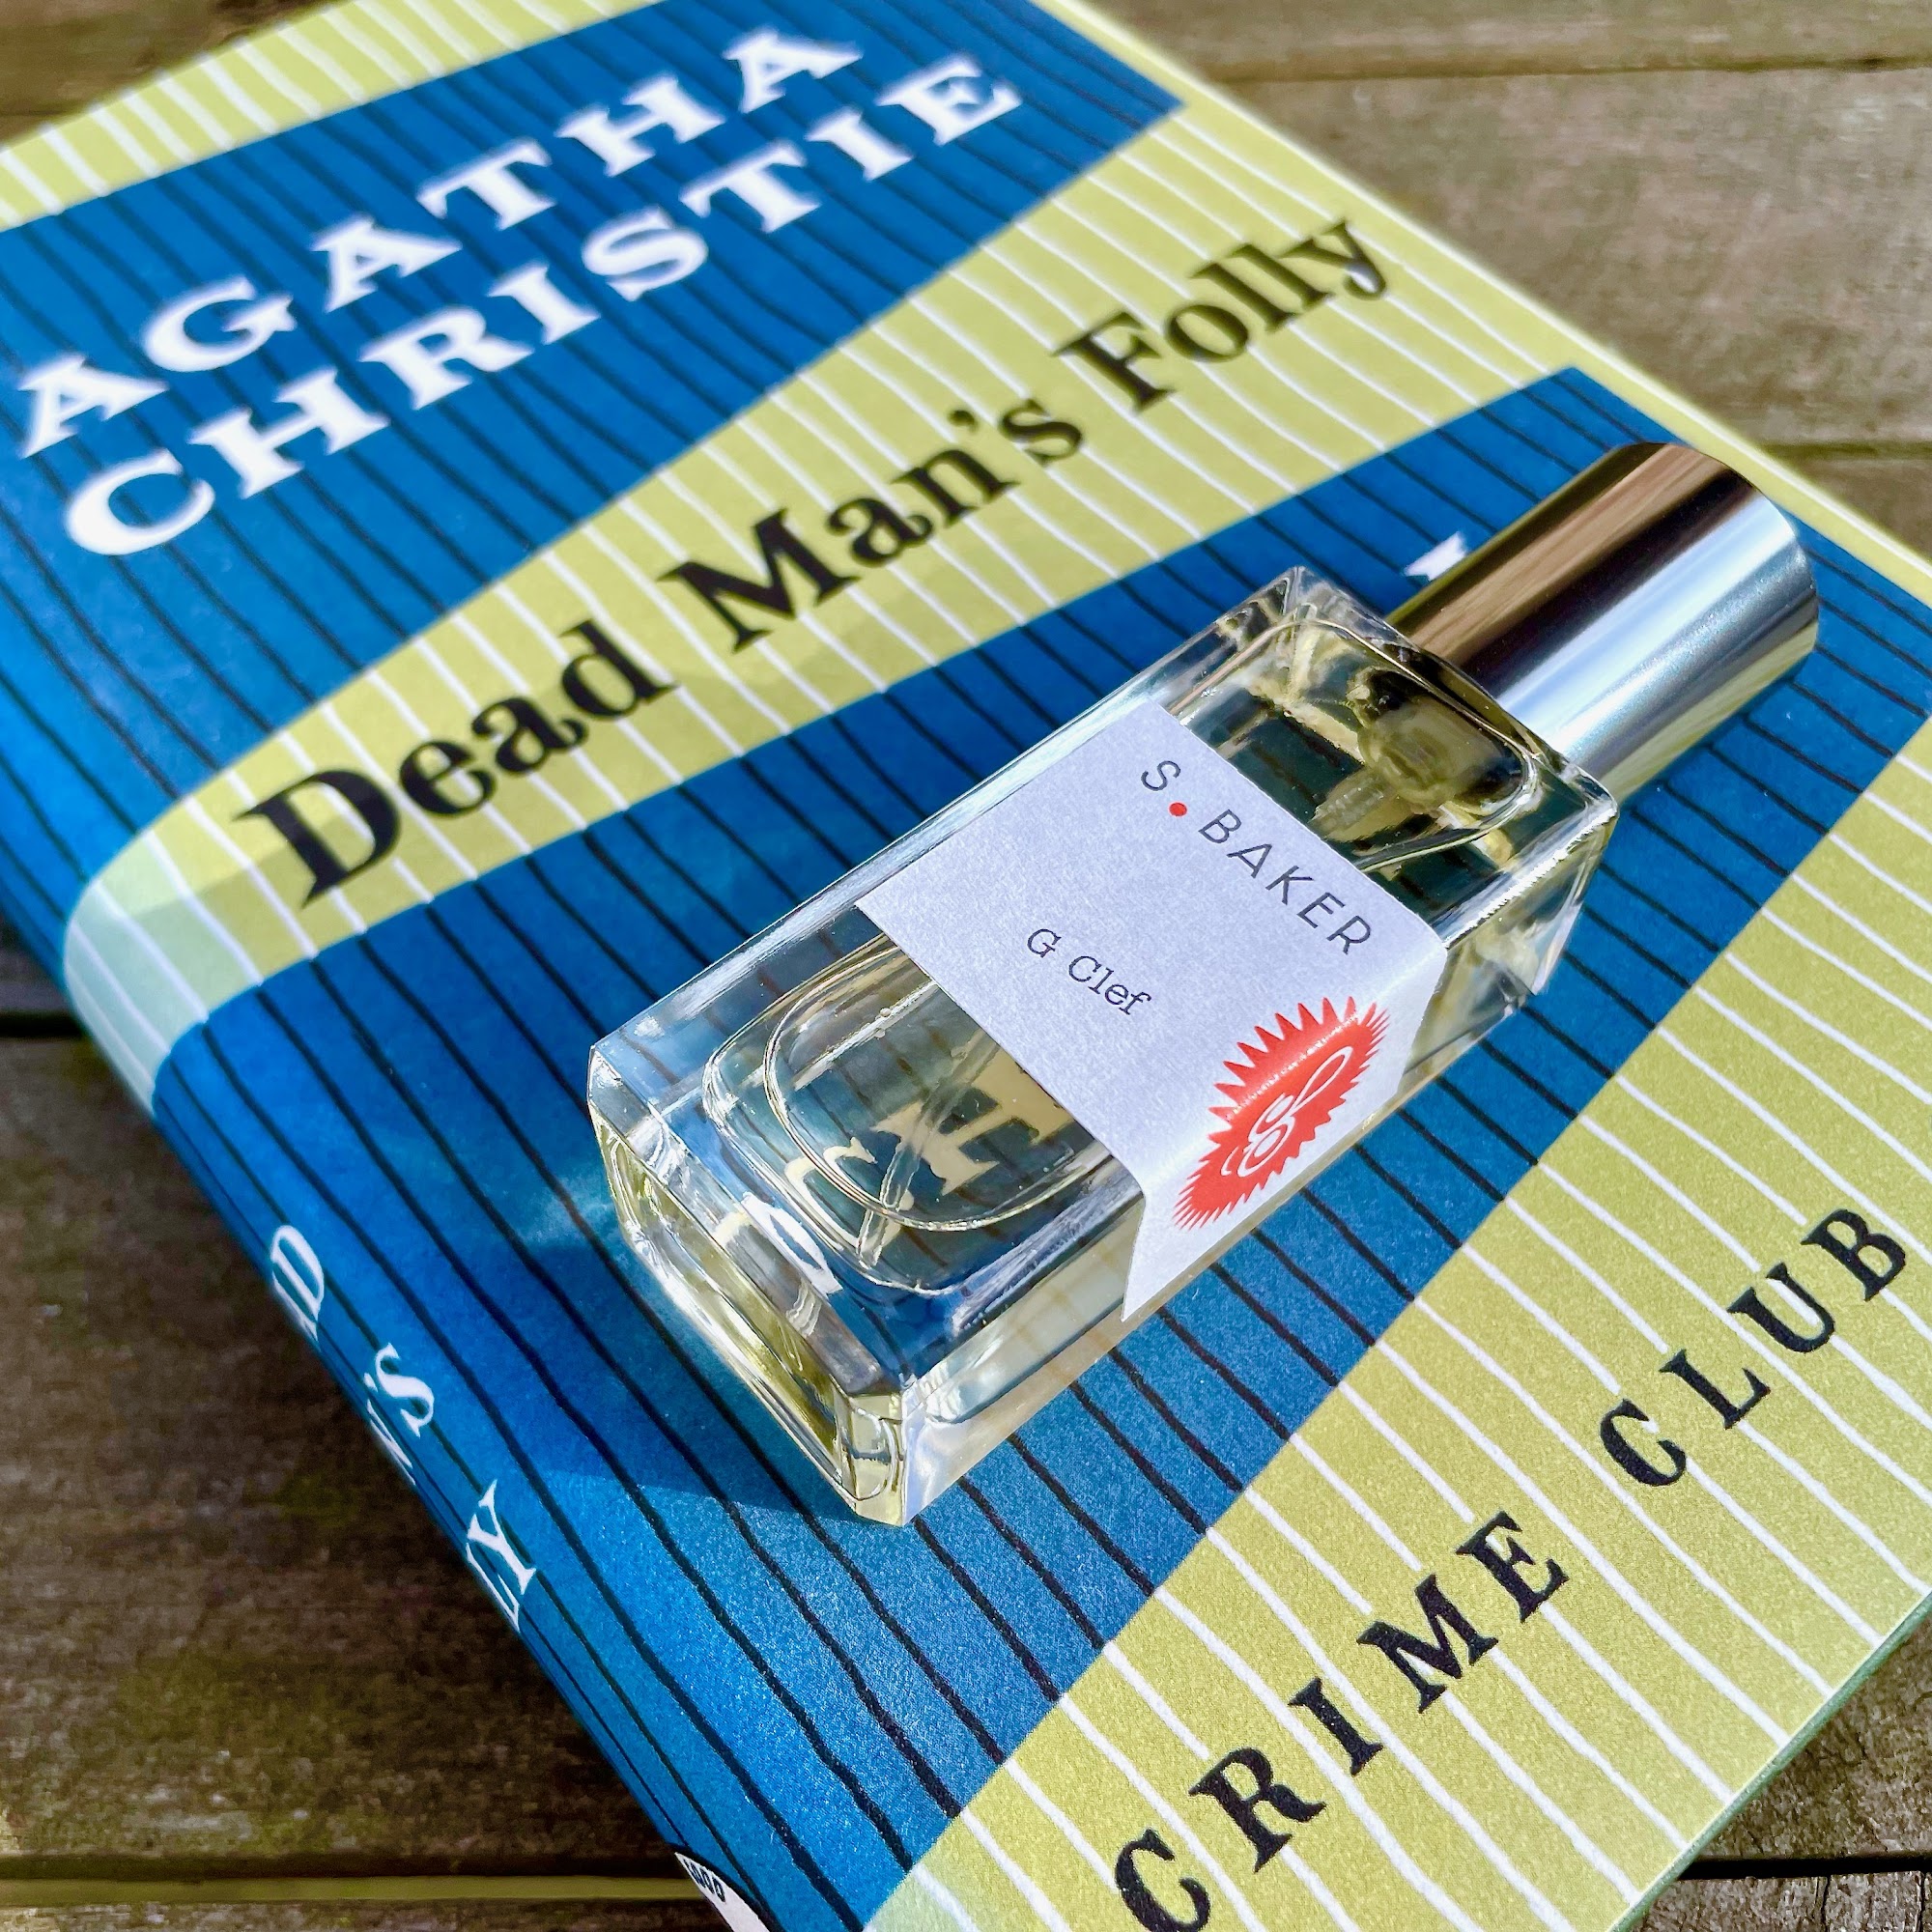 A bottle of G clef perfume on top of a copy of Agatha Christie's Dead Man's Folly book